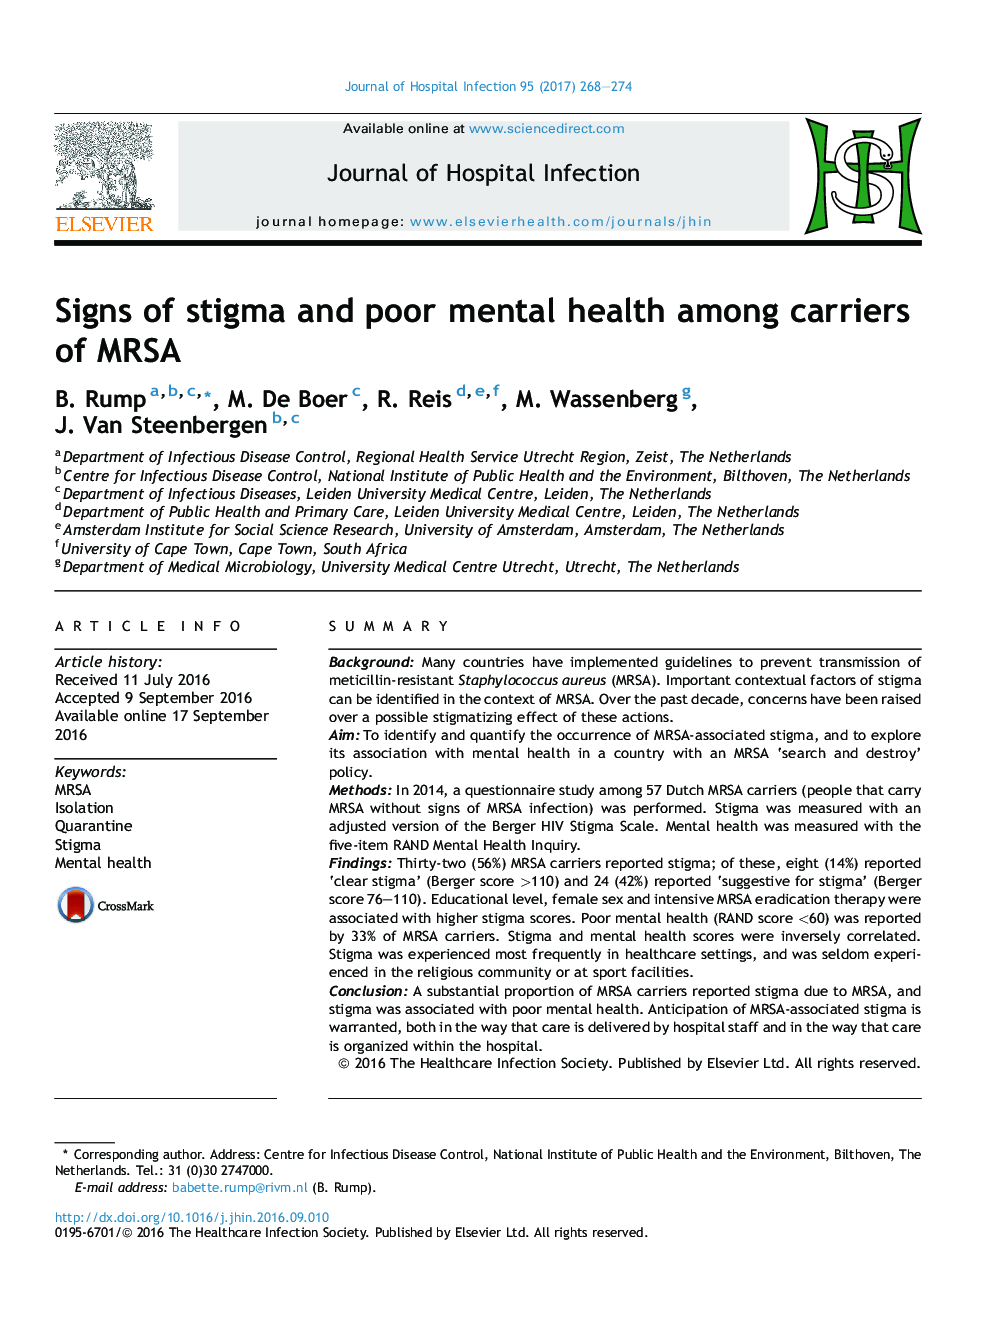 Signs of stigma and poor mental health among carriers of MRSA